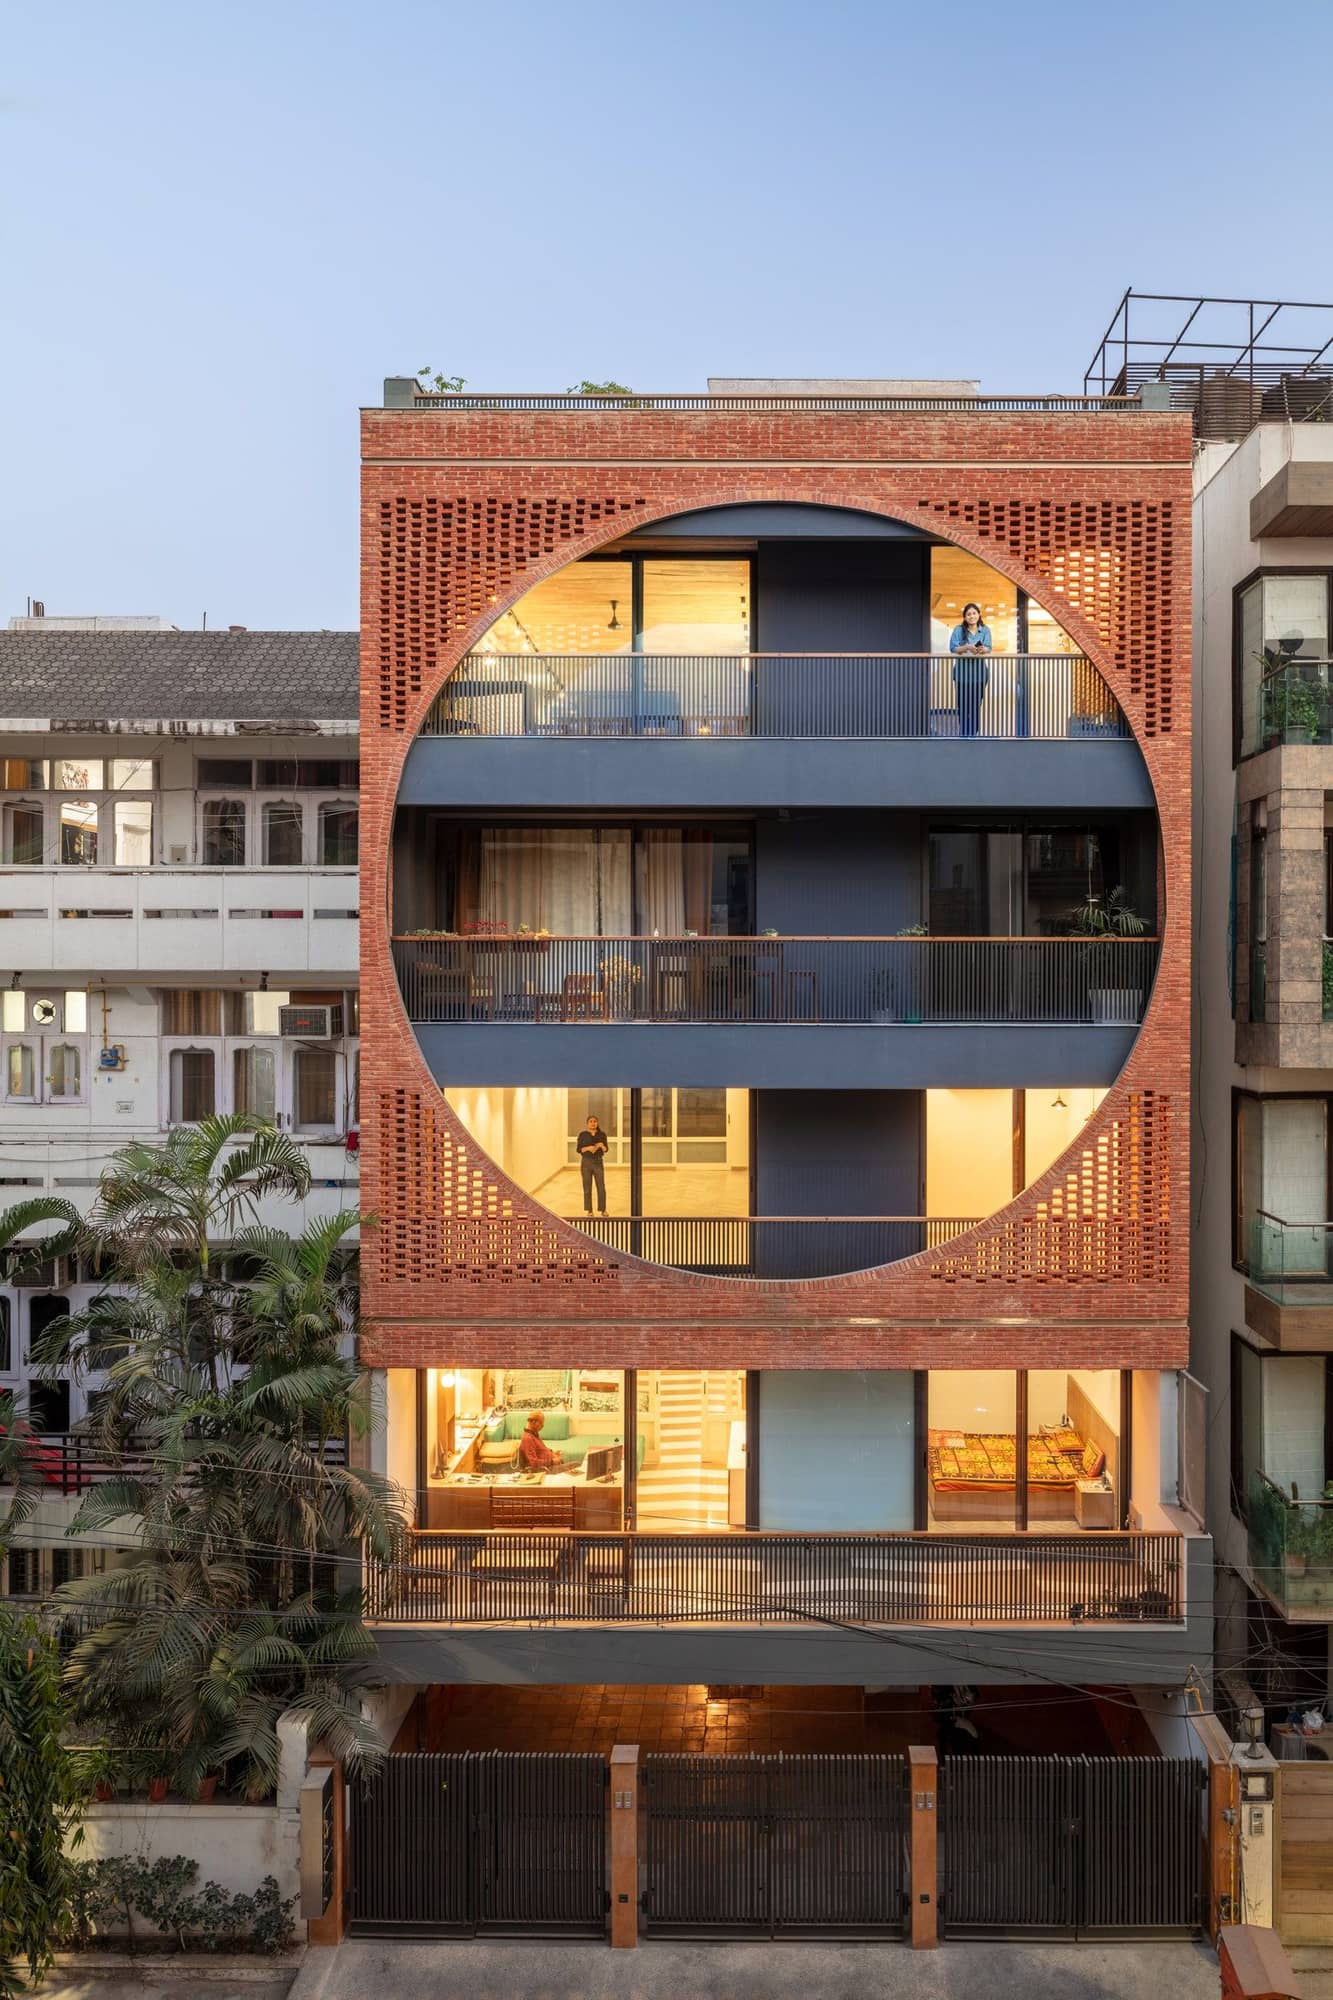 Modernist, Louis Khan-Inspired Apartment Building Perfectly Evokes the Architect’s “Calm Monumentality”